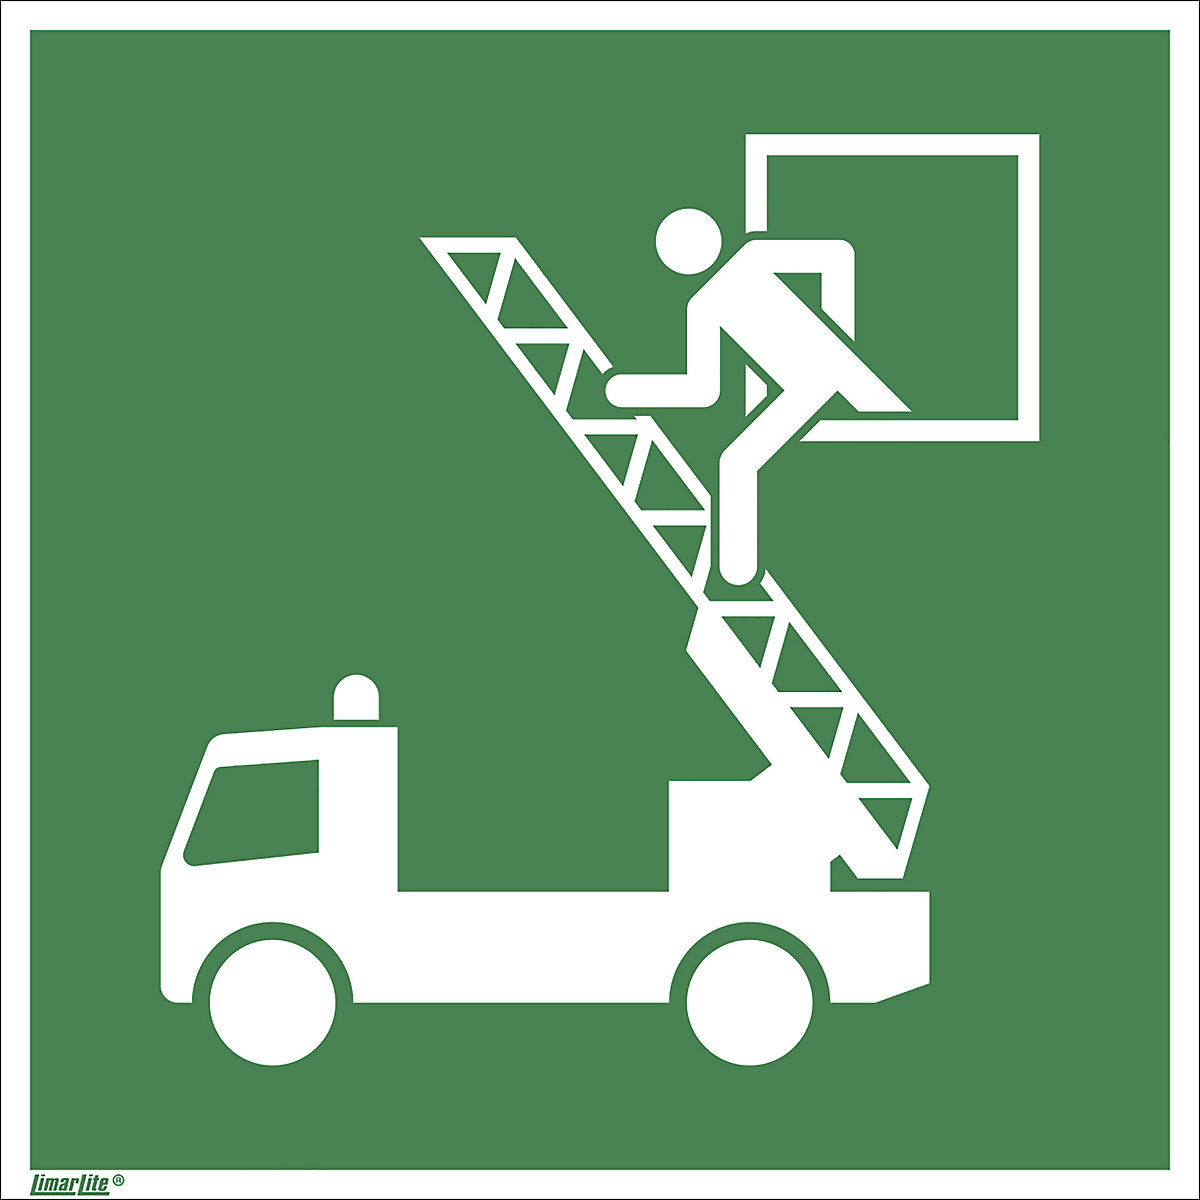 Emergency sign, emergency exit with access to fire ladder, pack of 10, aluminium, 200 x 200 mm